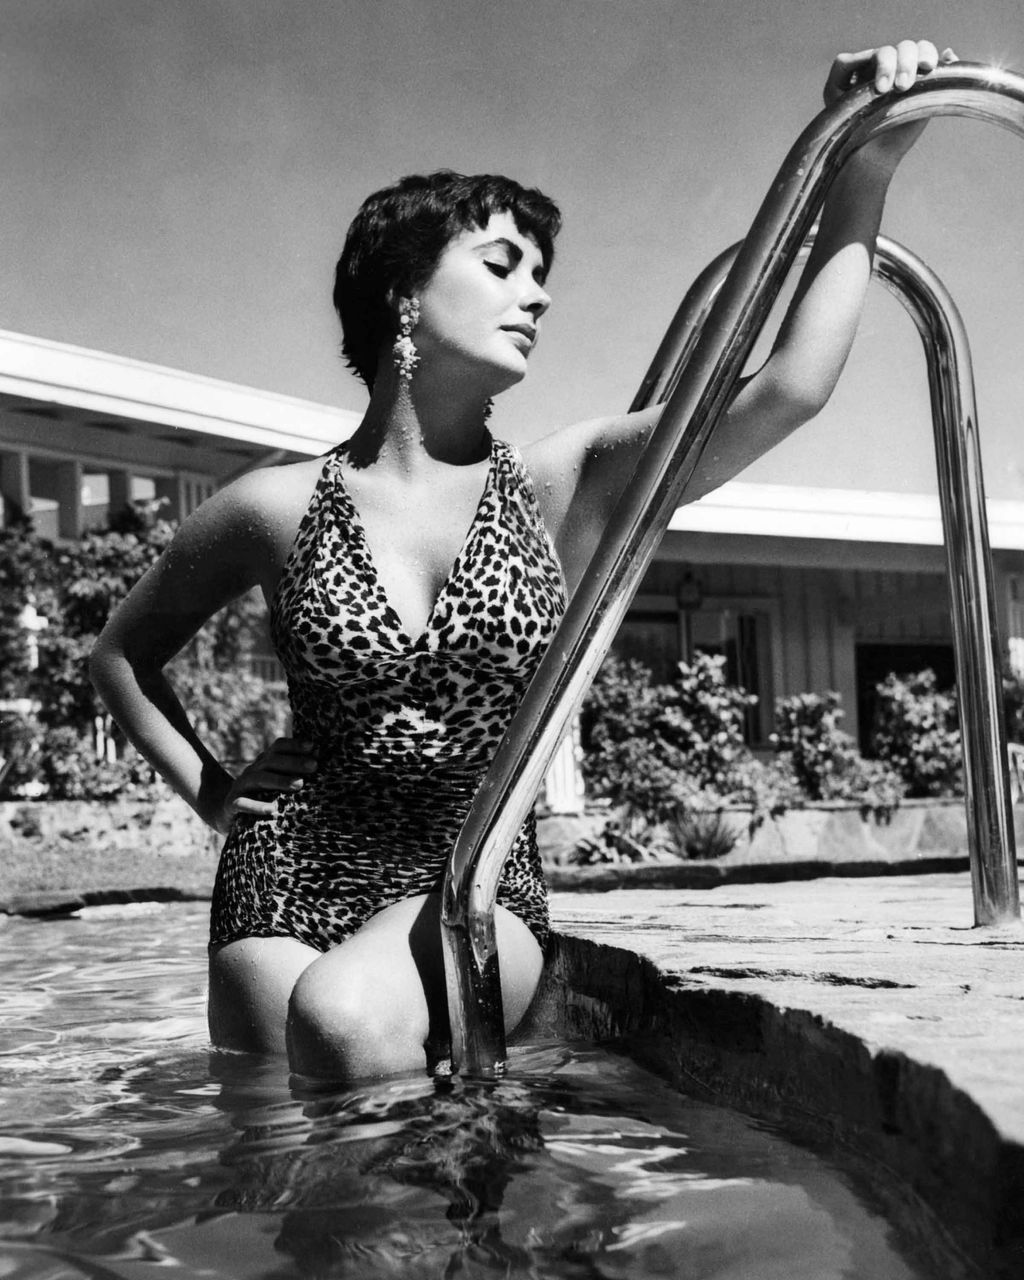 Elizabeth Taylor in 1955 emerging from a swimming pool